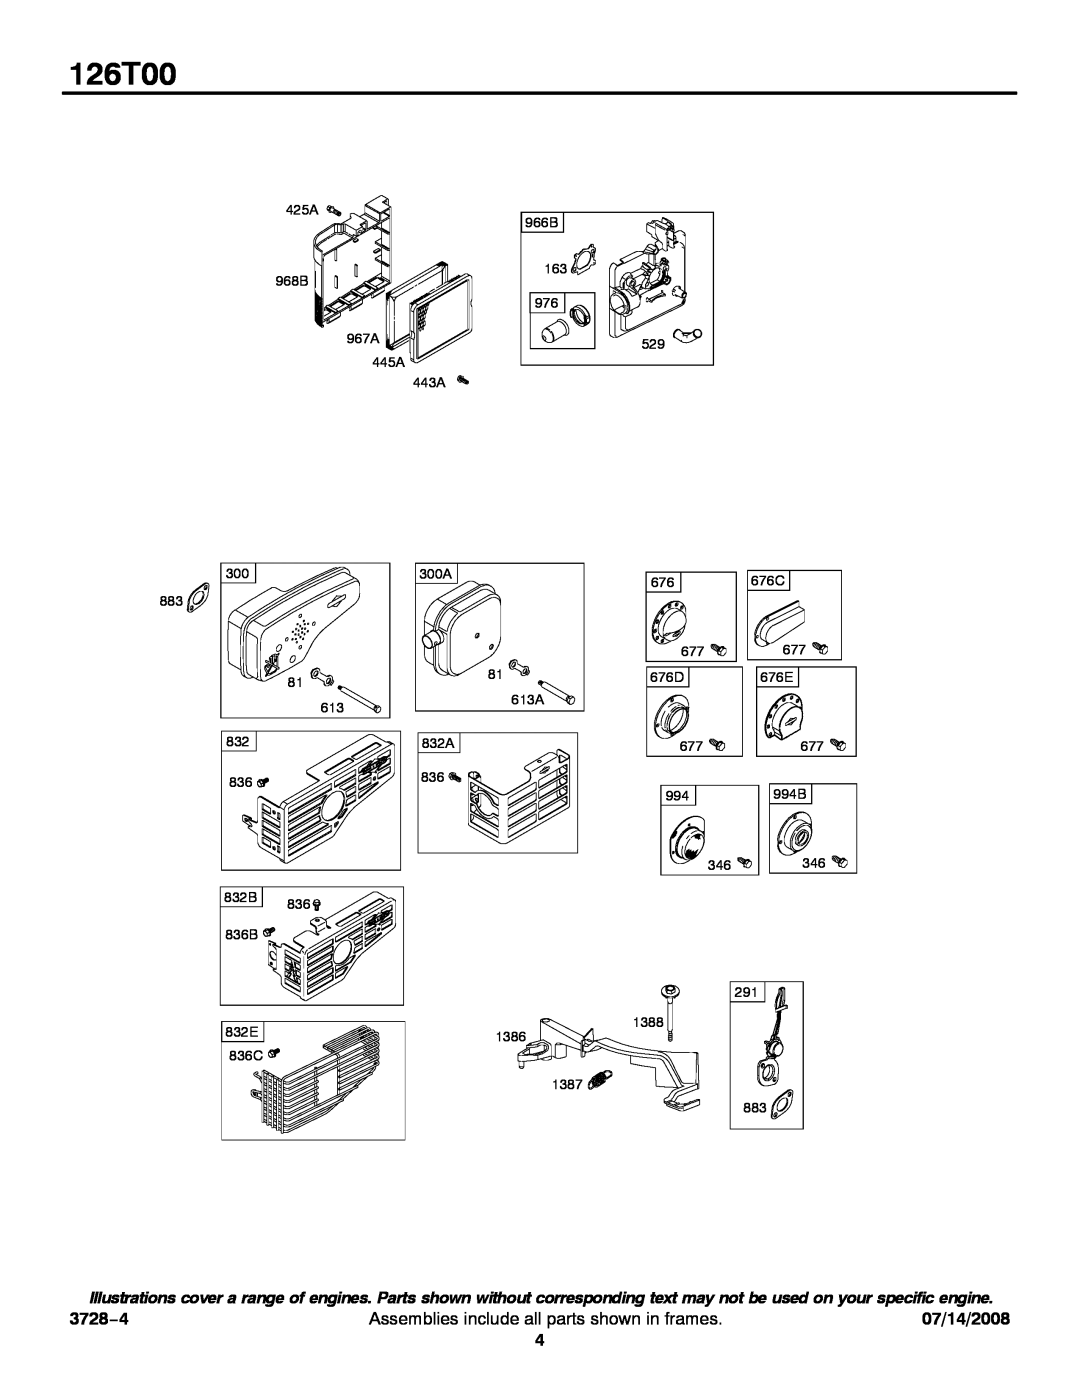 Snapper 126T00 service manual 3728−4, Assemblies include all parts shown in frames, 07/14/2008 